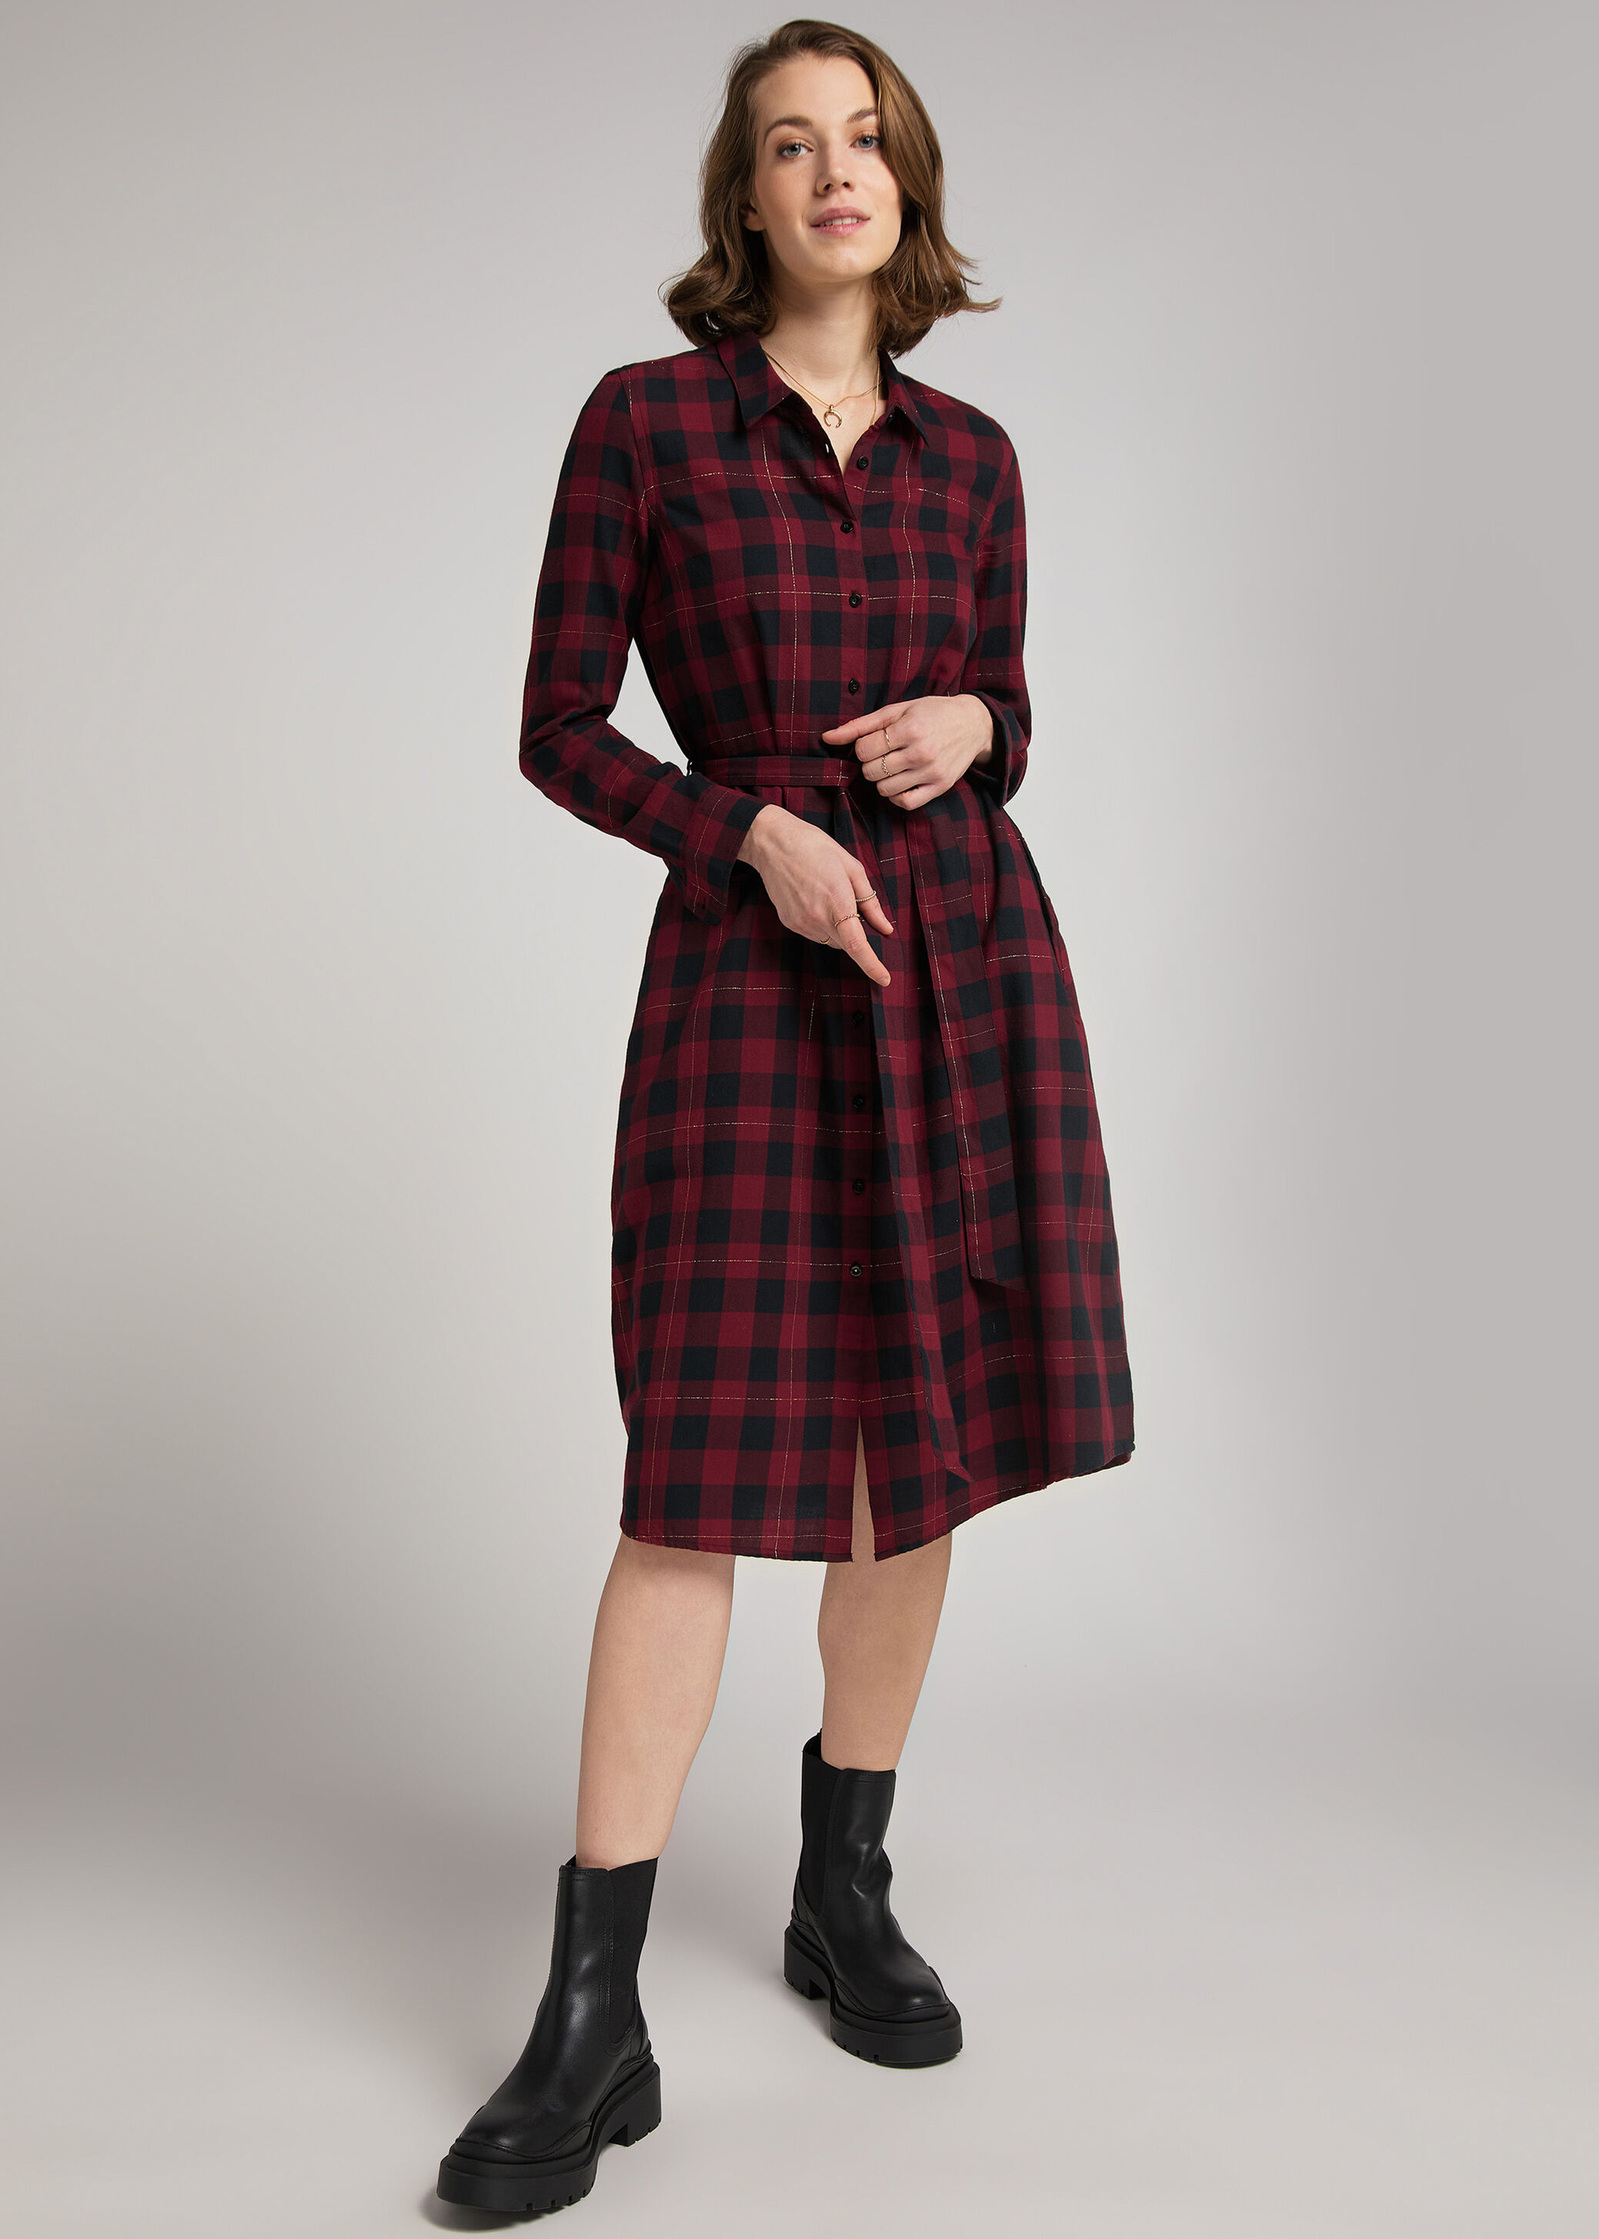 Mustang Plaid Dress With Tie Belt Check X - 1011916-12198